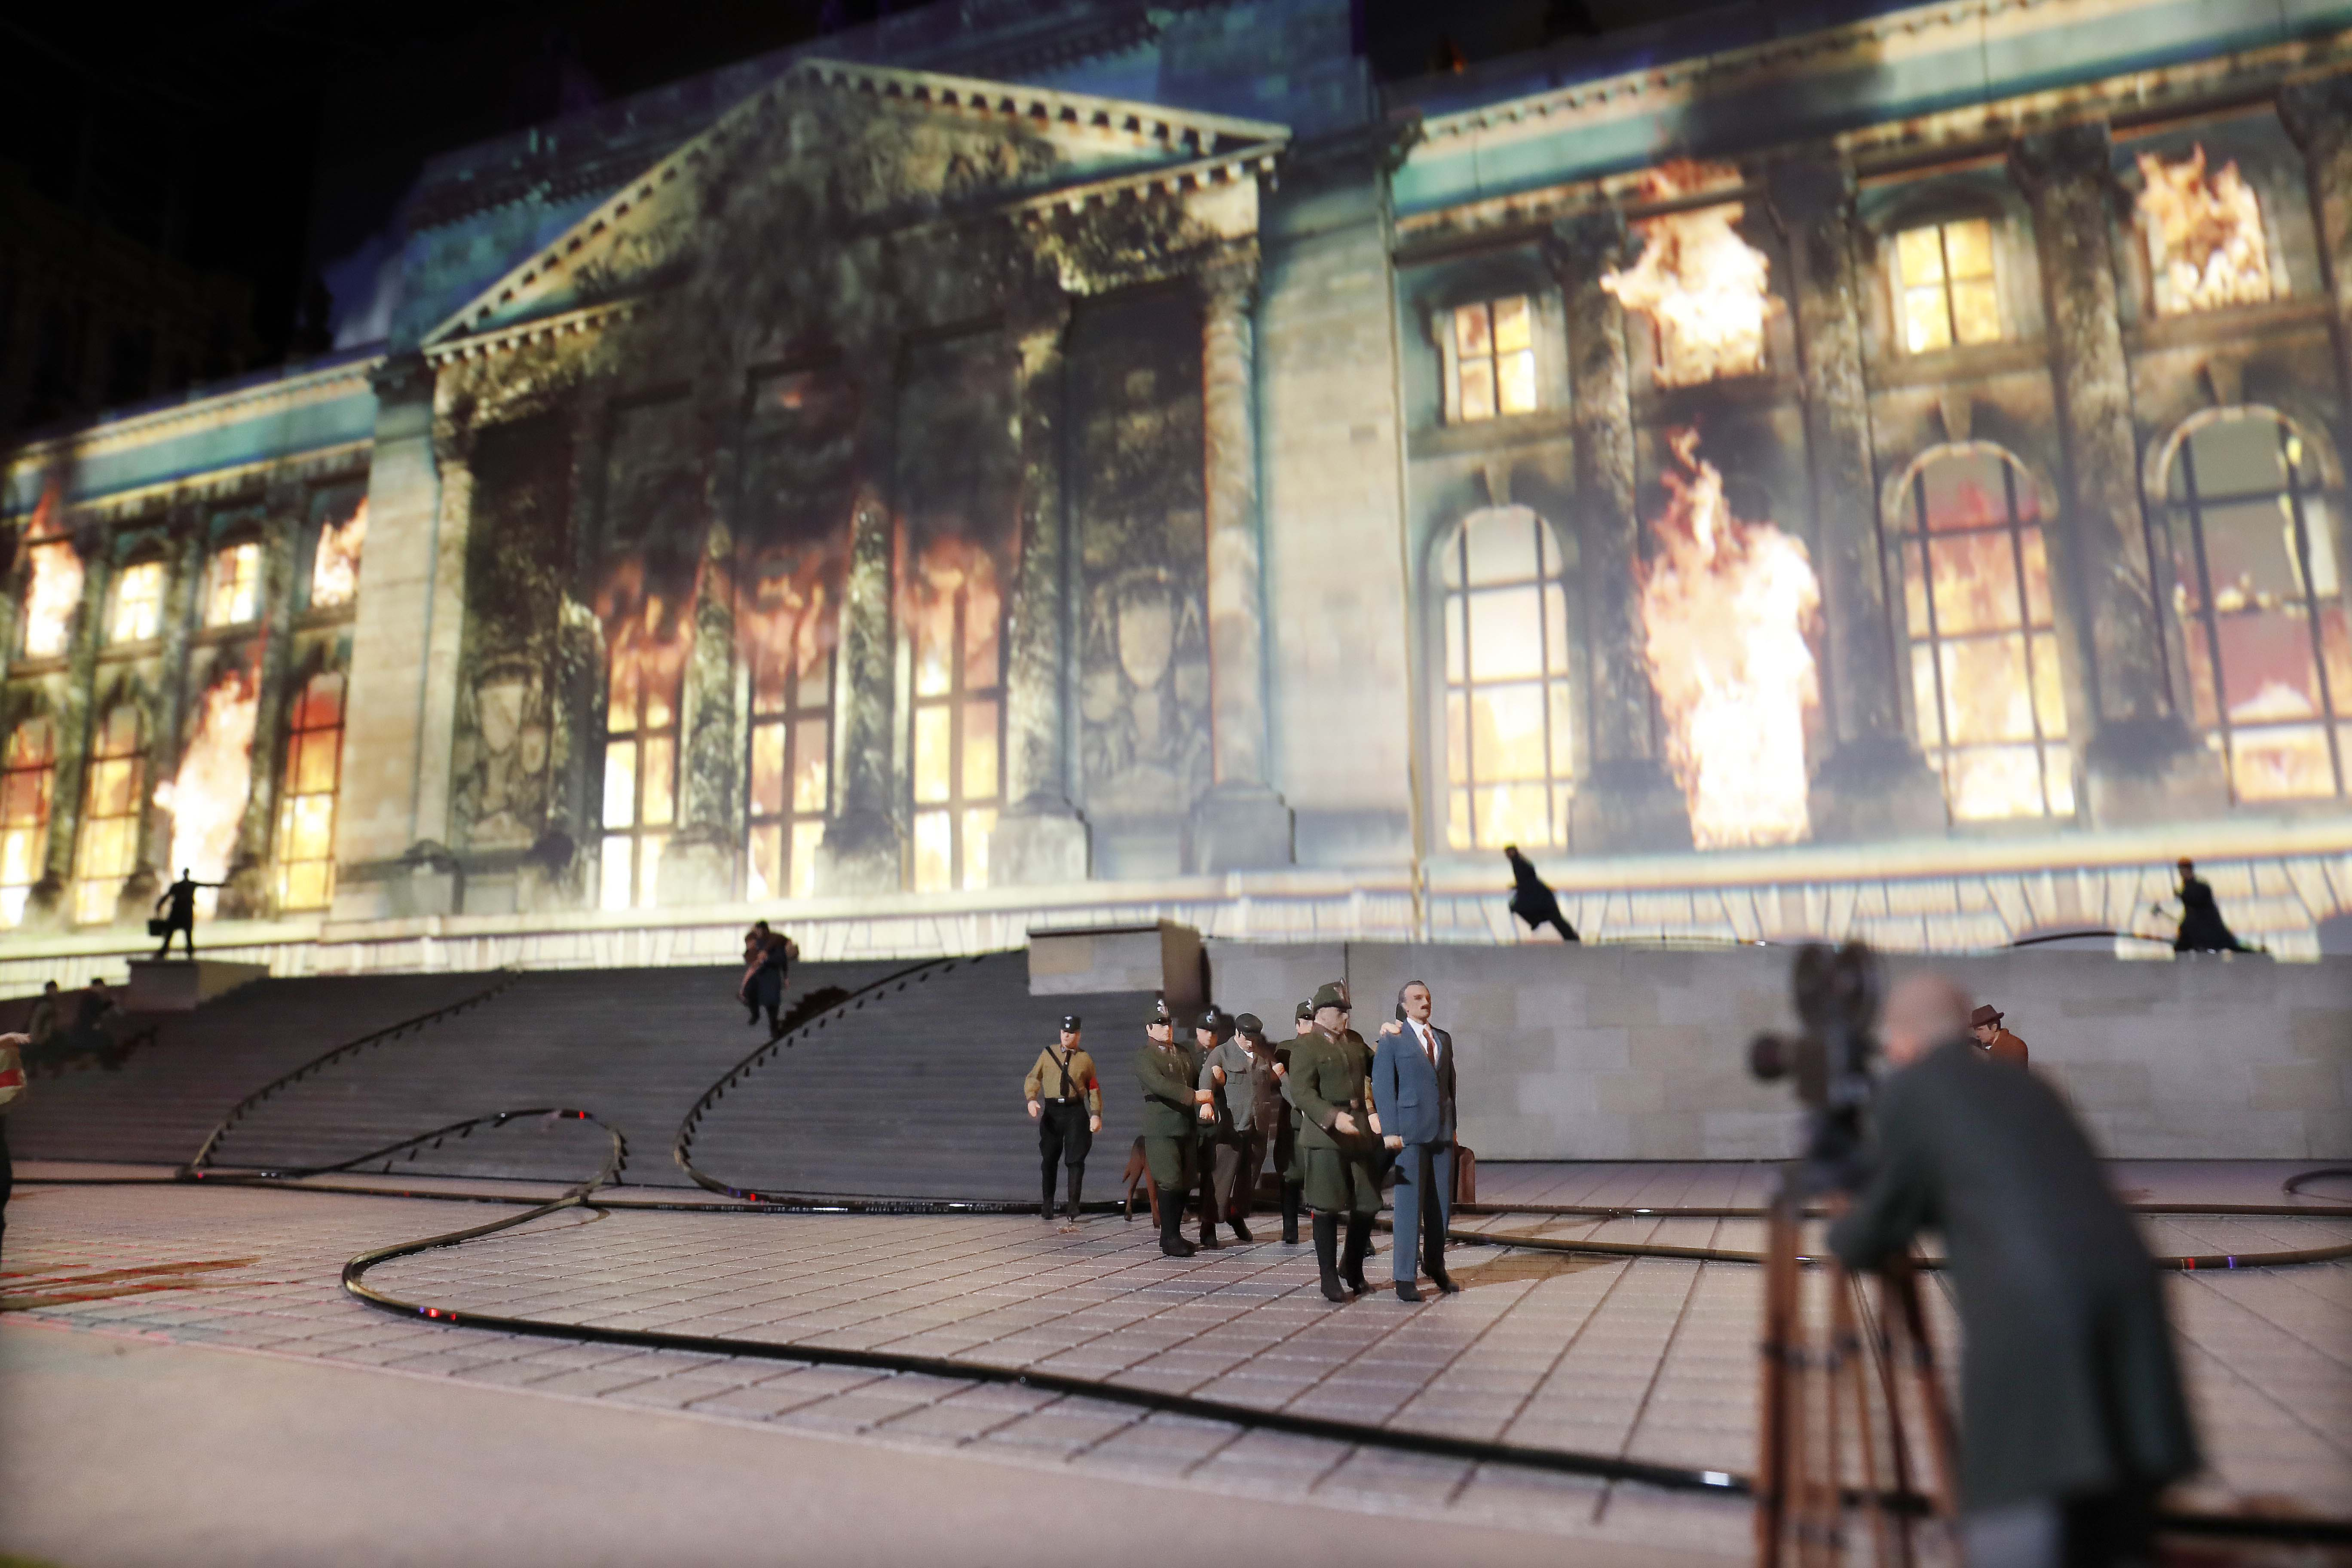 The Reichstag is on fire - here as miniature in Little BIG City Berlin